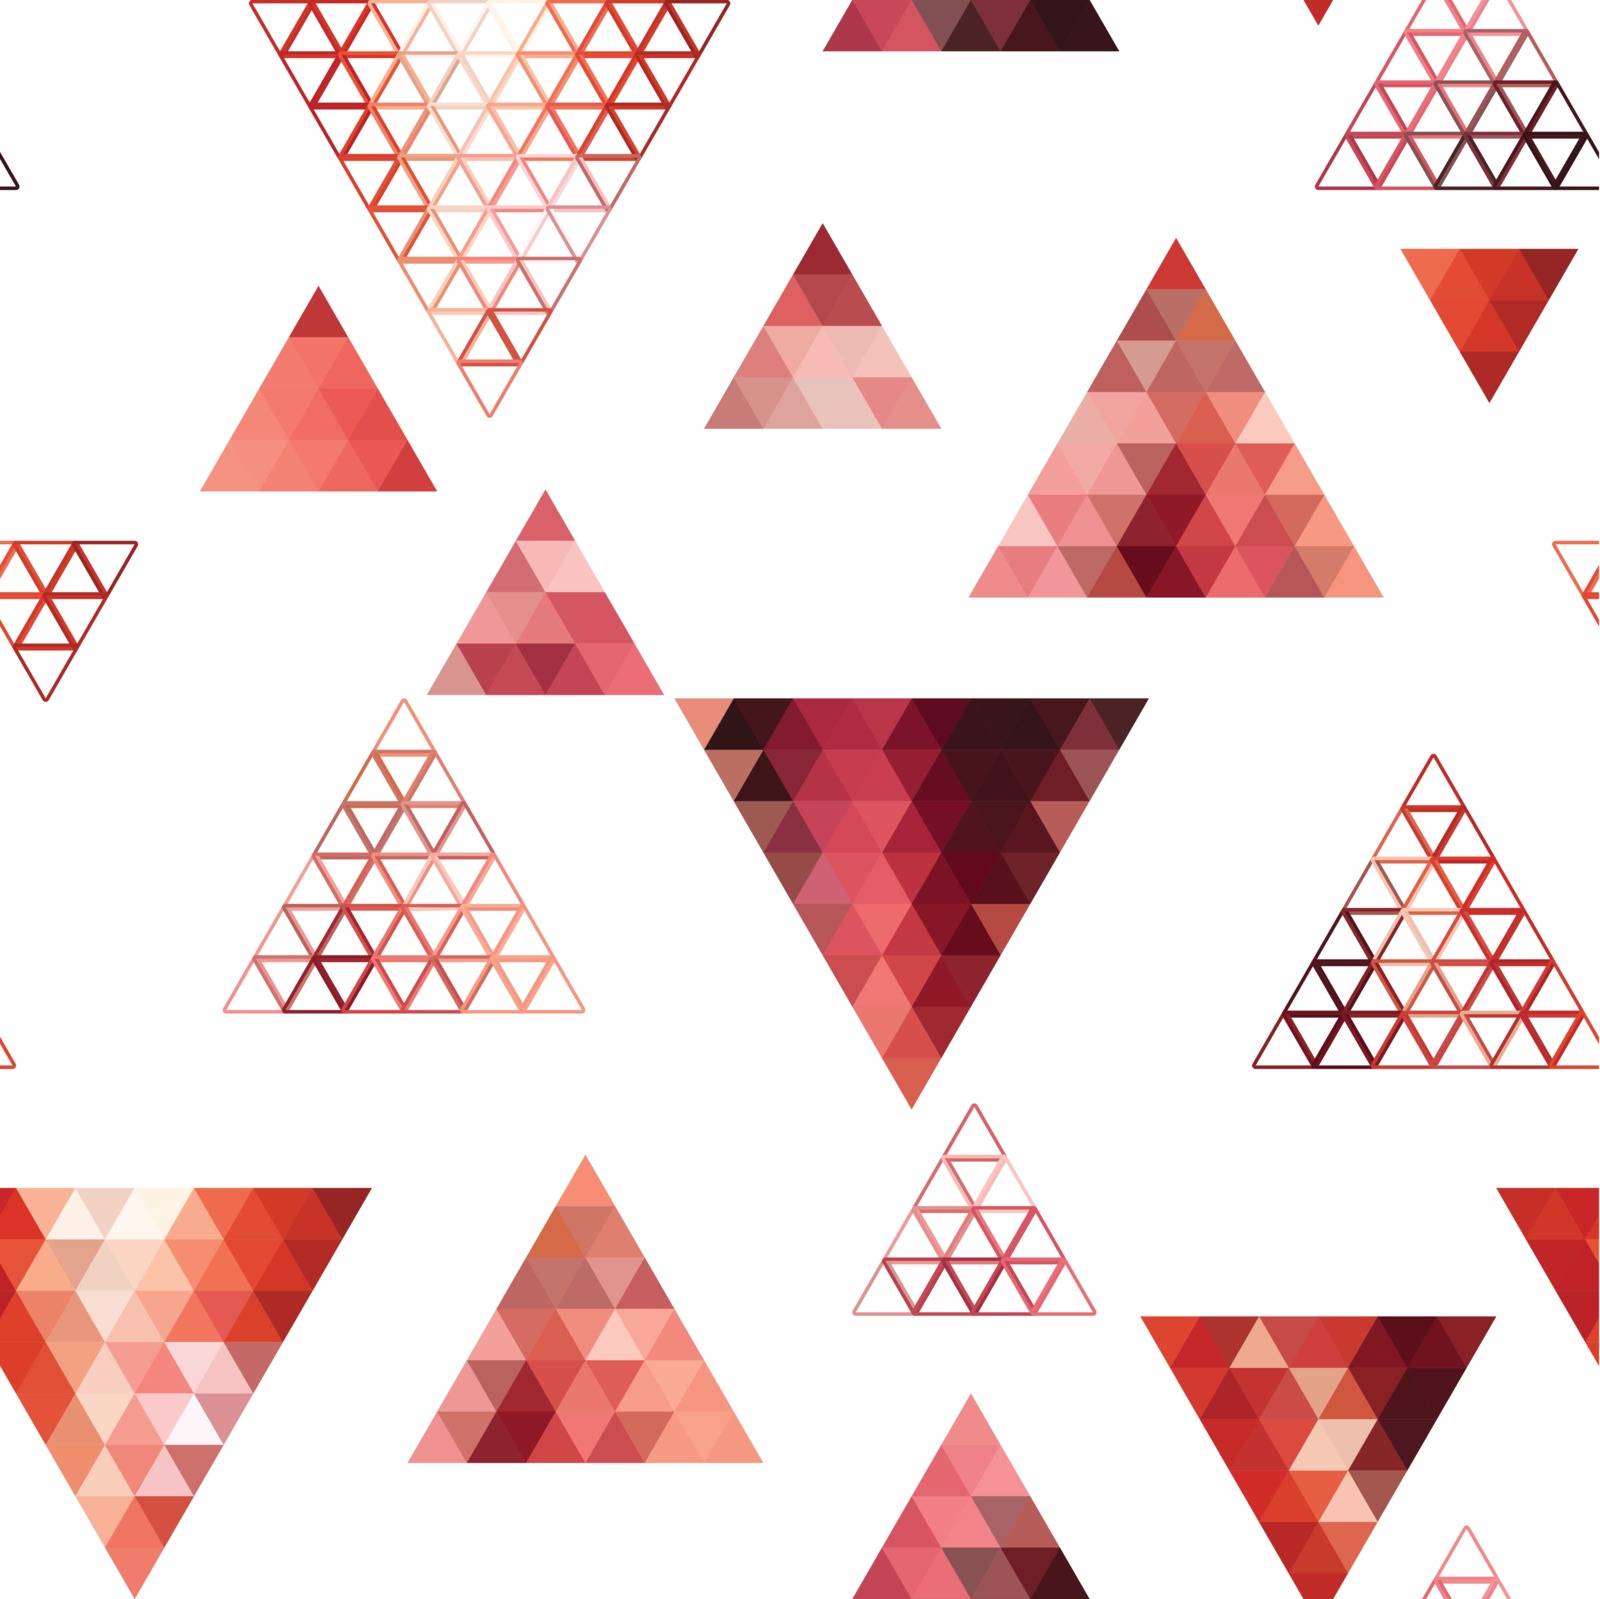 Retro pattern of hexagon shapes. Colorful mosaic backdrop. Geometric hipster retro background, place your text on the top. Triangle background.